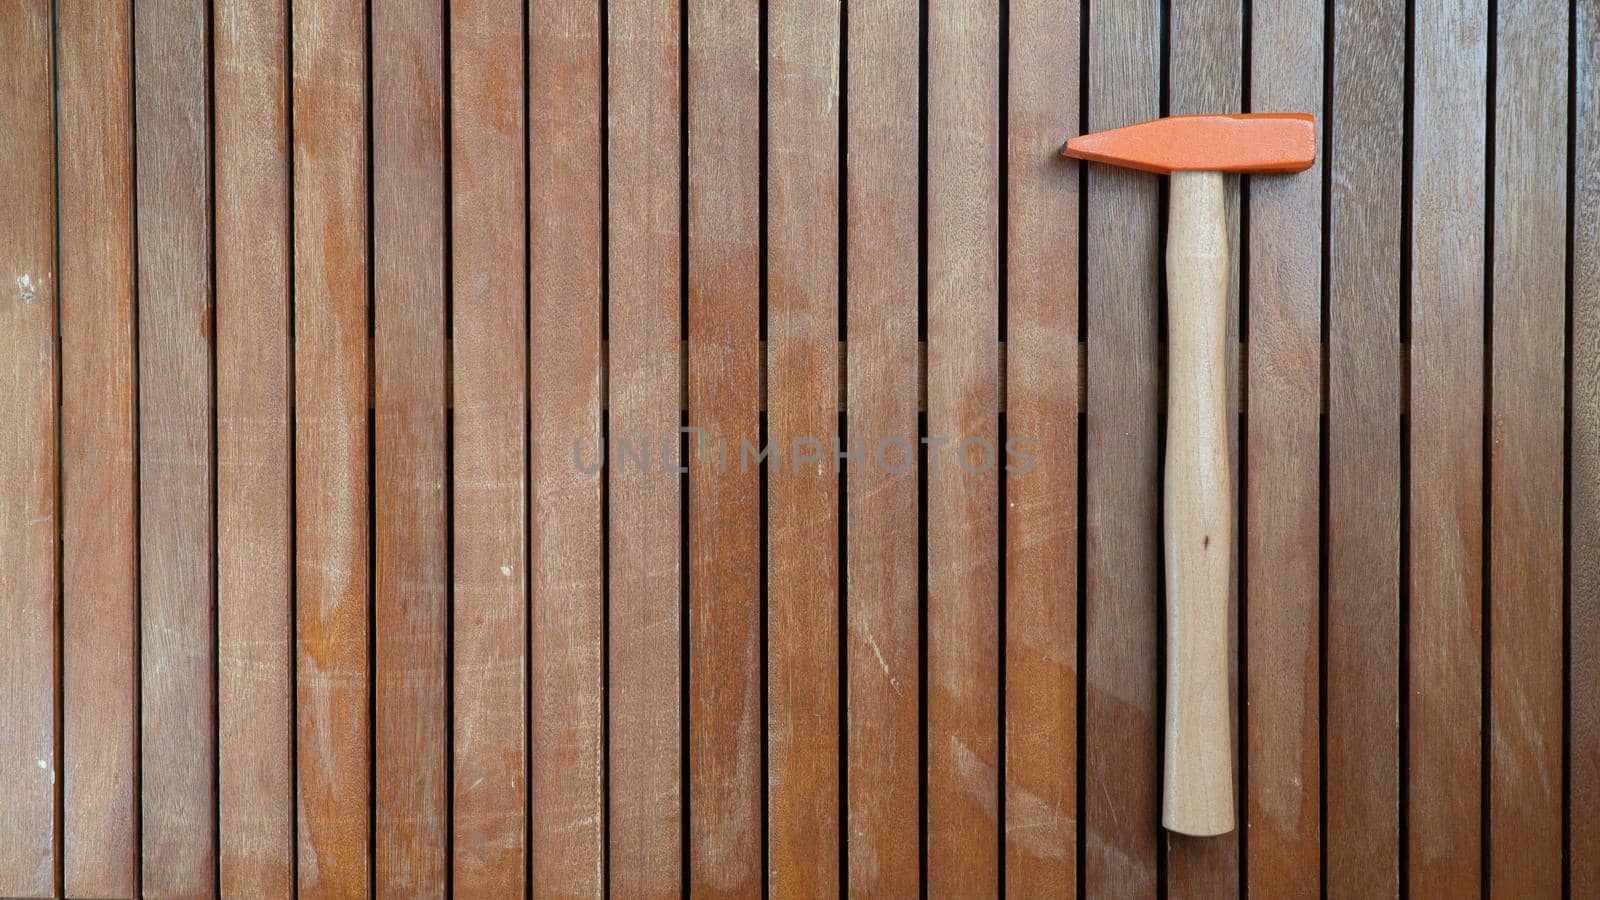 Hammer on wooden background vertical boards with free space for text. High quality photo